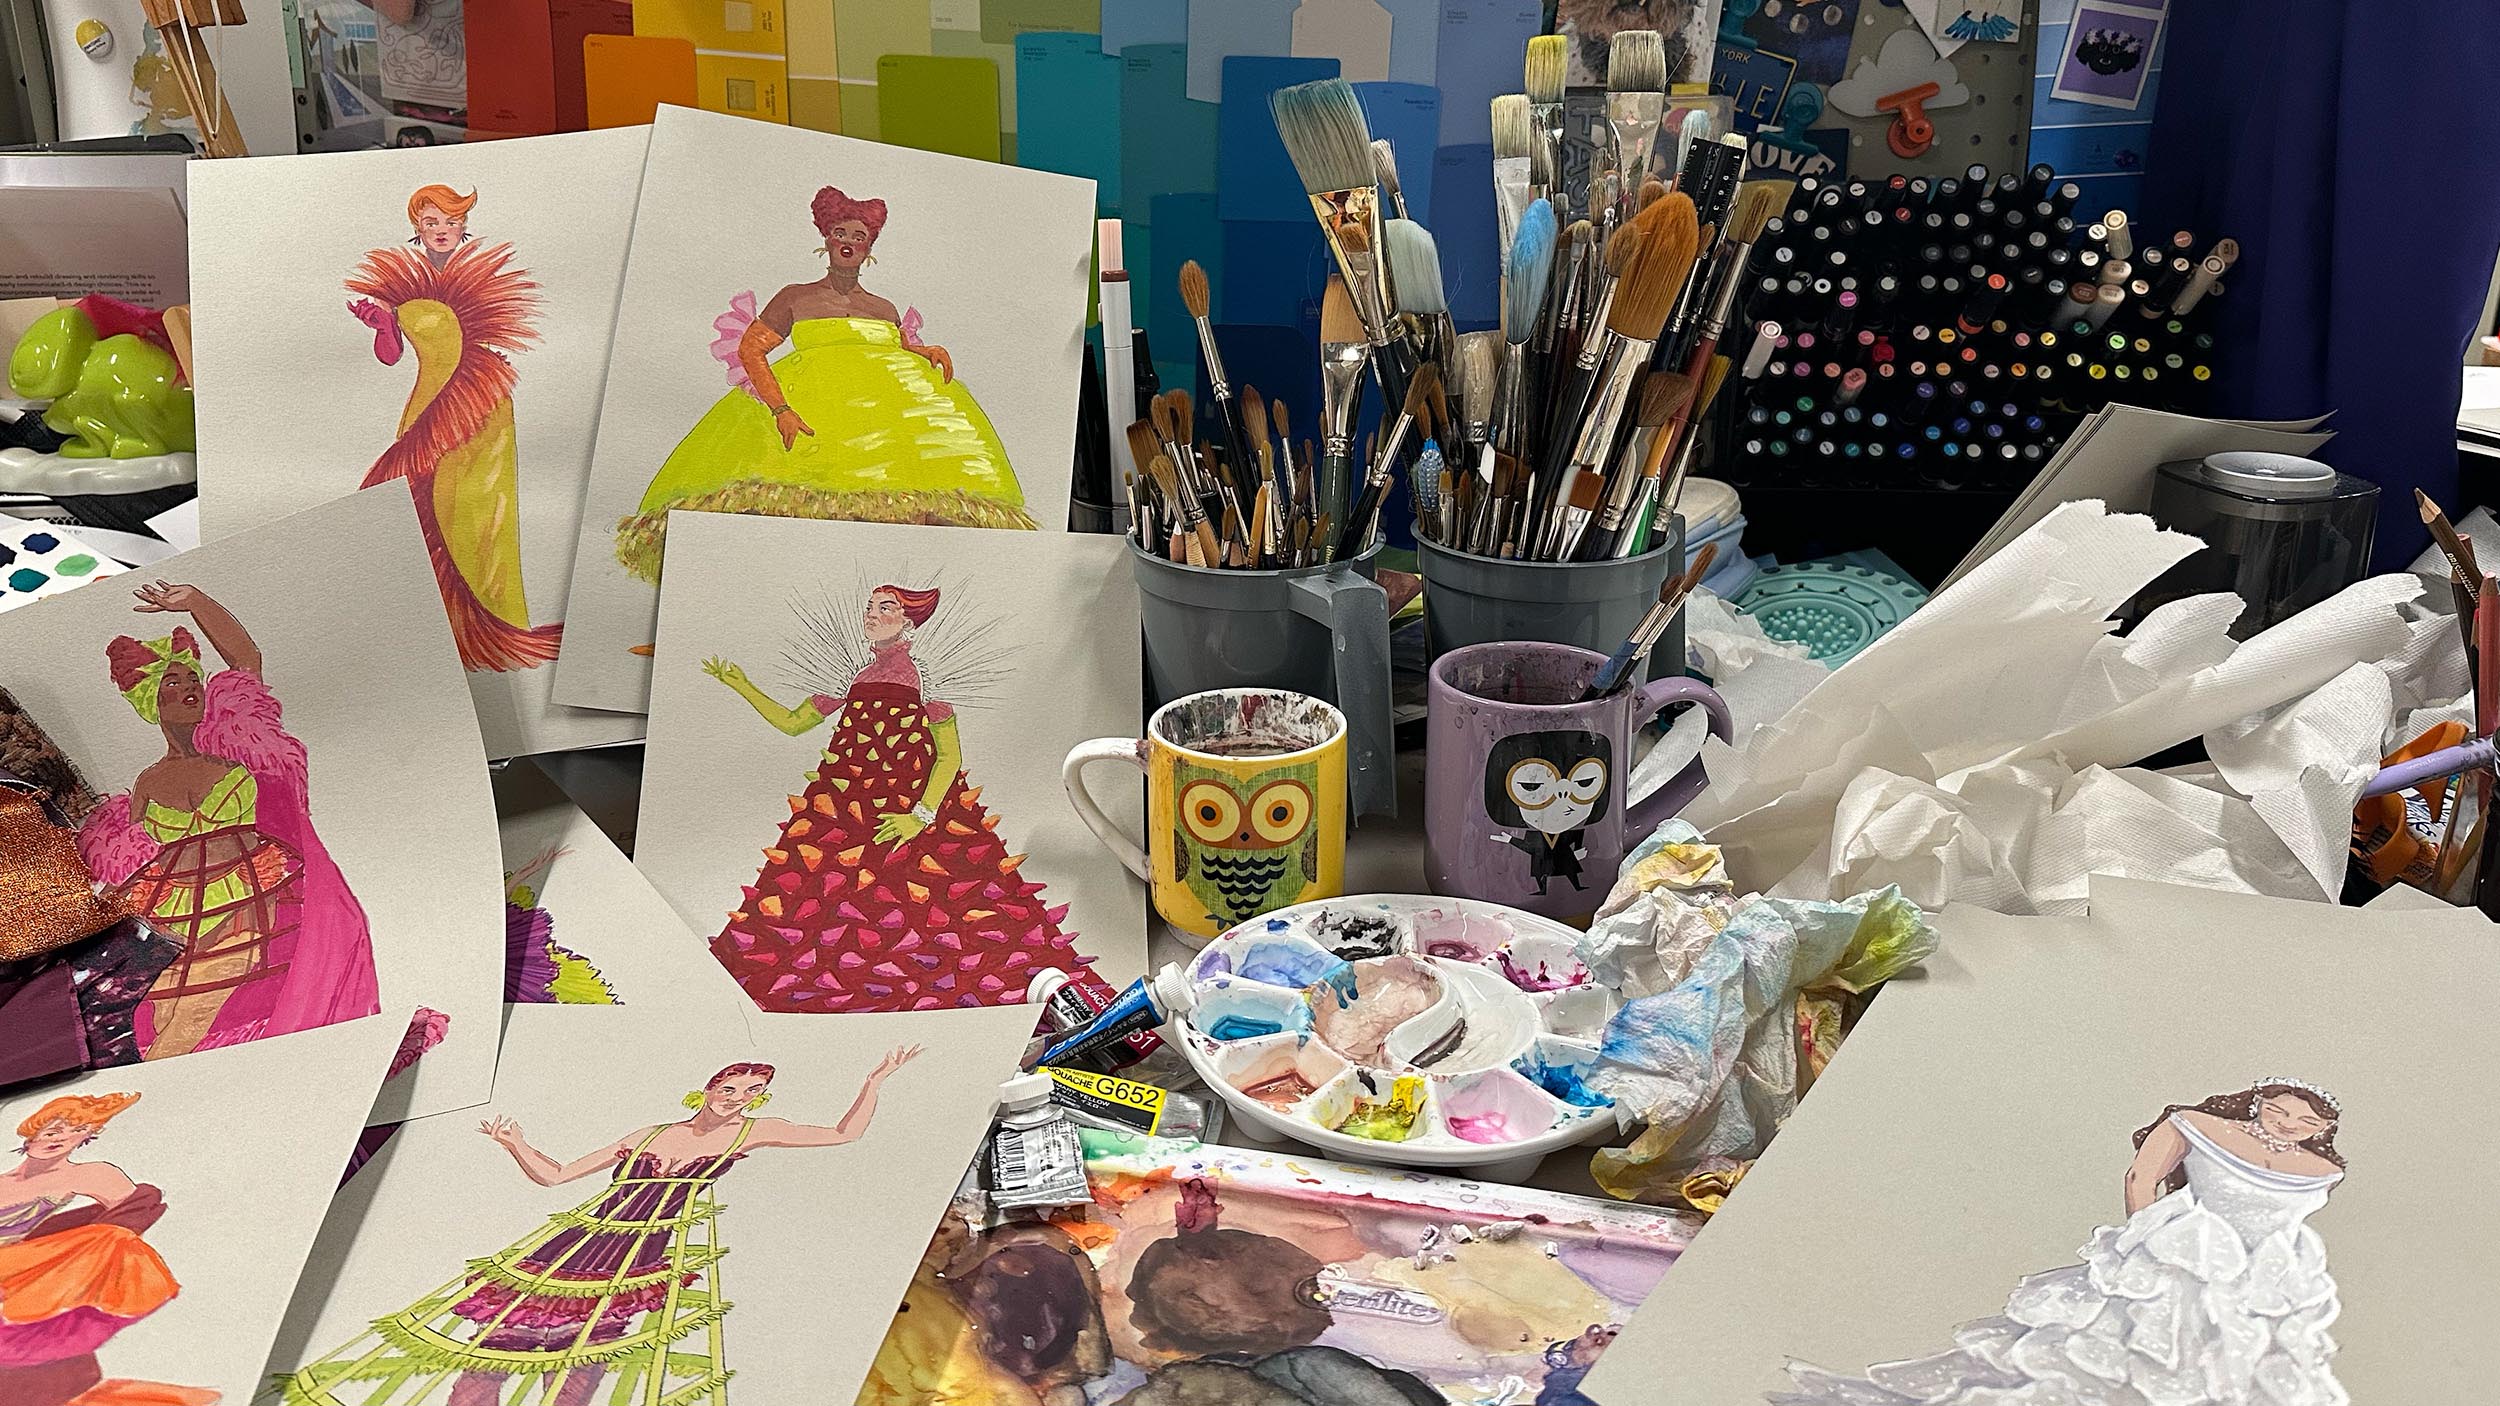 The making of Cendrillon - Time lapse video of Camille painting Cendrillon renderings.